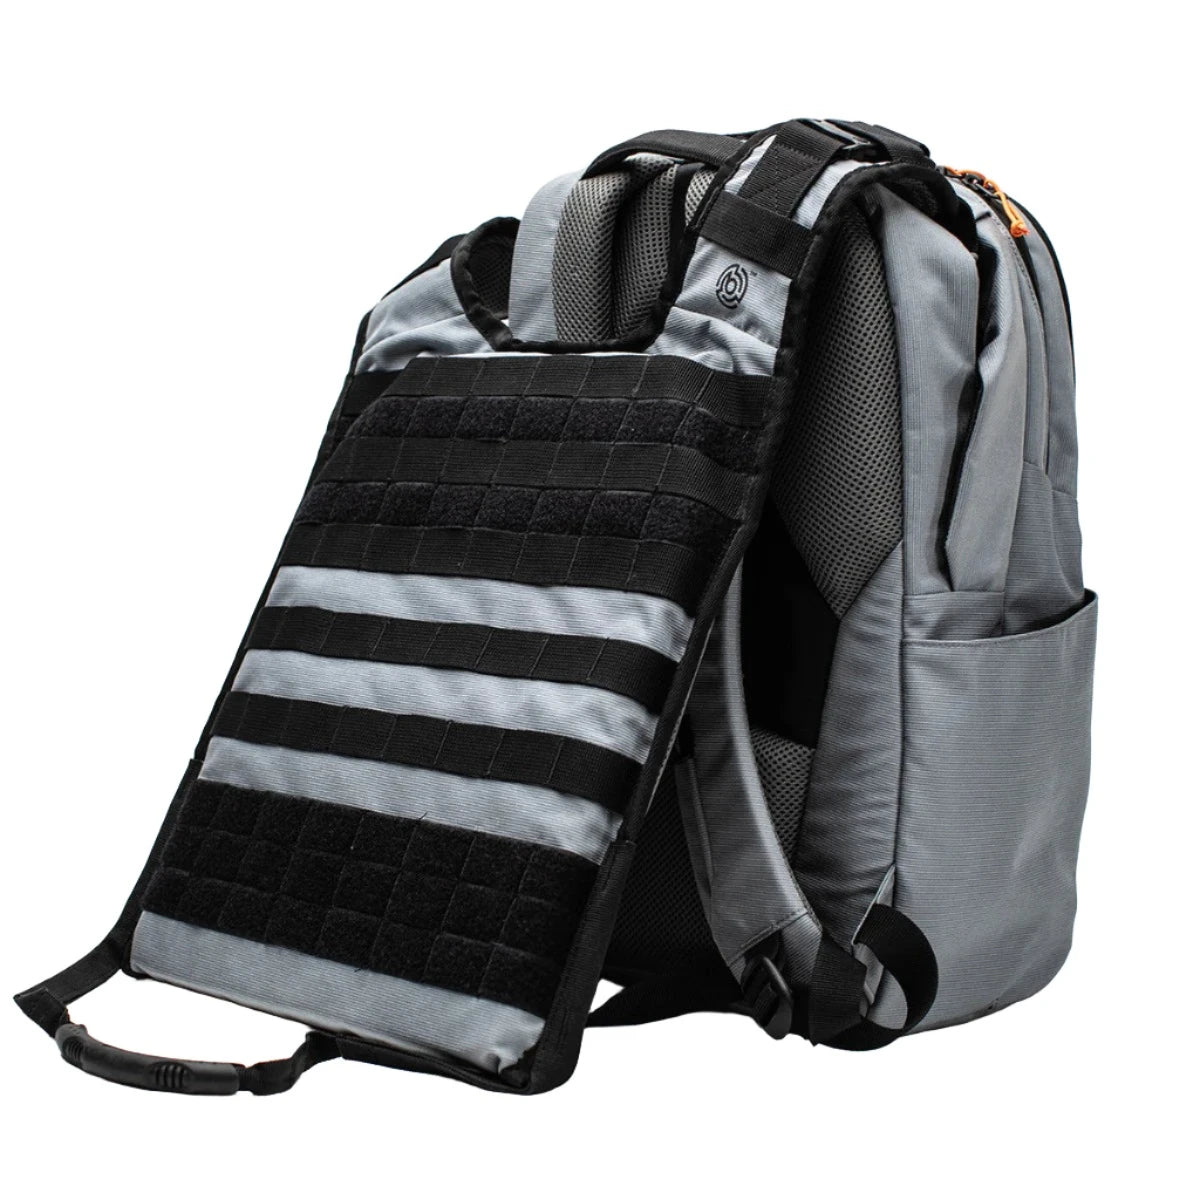 Byrna Shield Ballisticpac III+ Bulletproof Backpack Body Armor [Rifle Rated] - ssairsoft.com